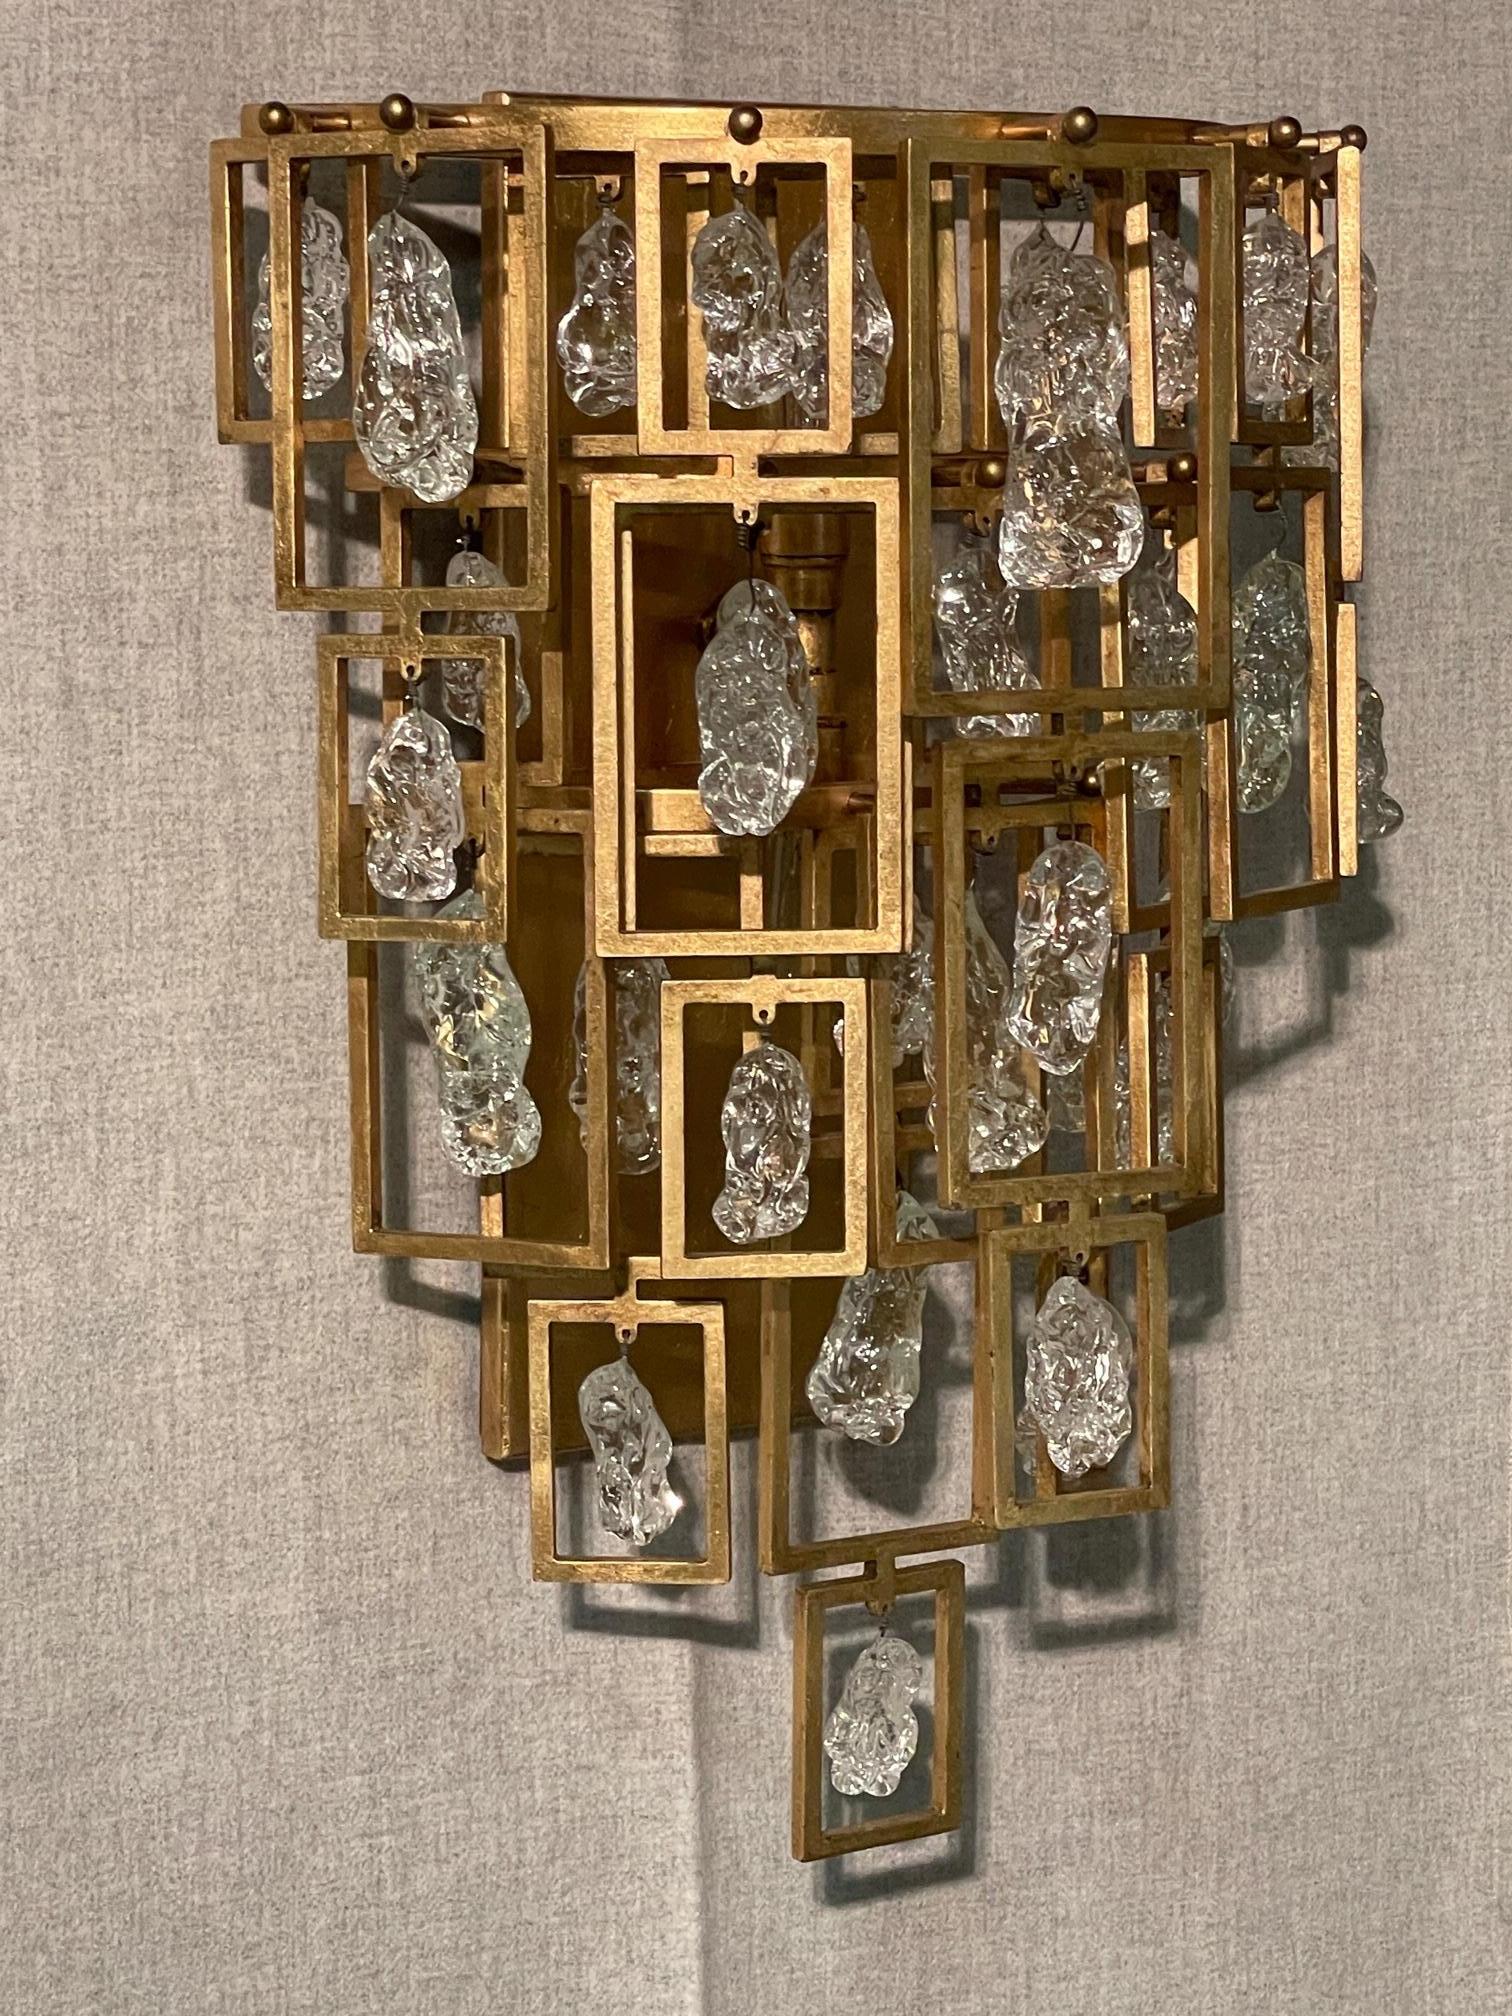 Jean de Merry collaborated with renown interior designer Kara Mann with a custom design aptly named the Kara Chandelier.  It's success spawned this accompanying set of wall sconces.  The design is elegant and decadent beyond words.  Their diverse